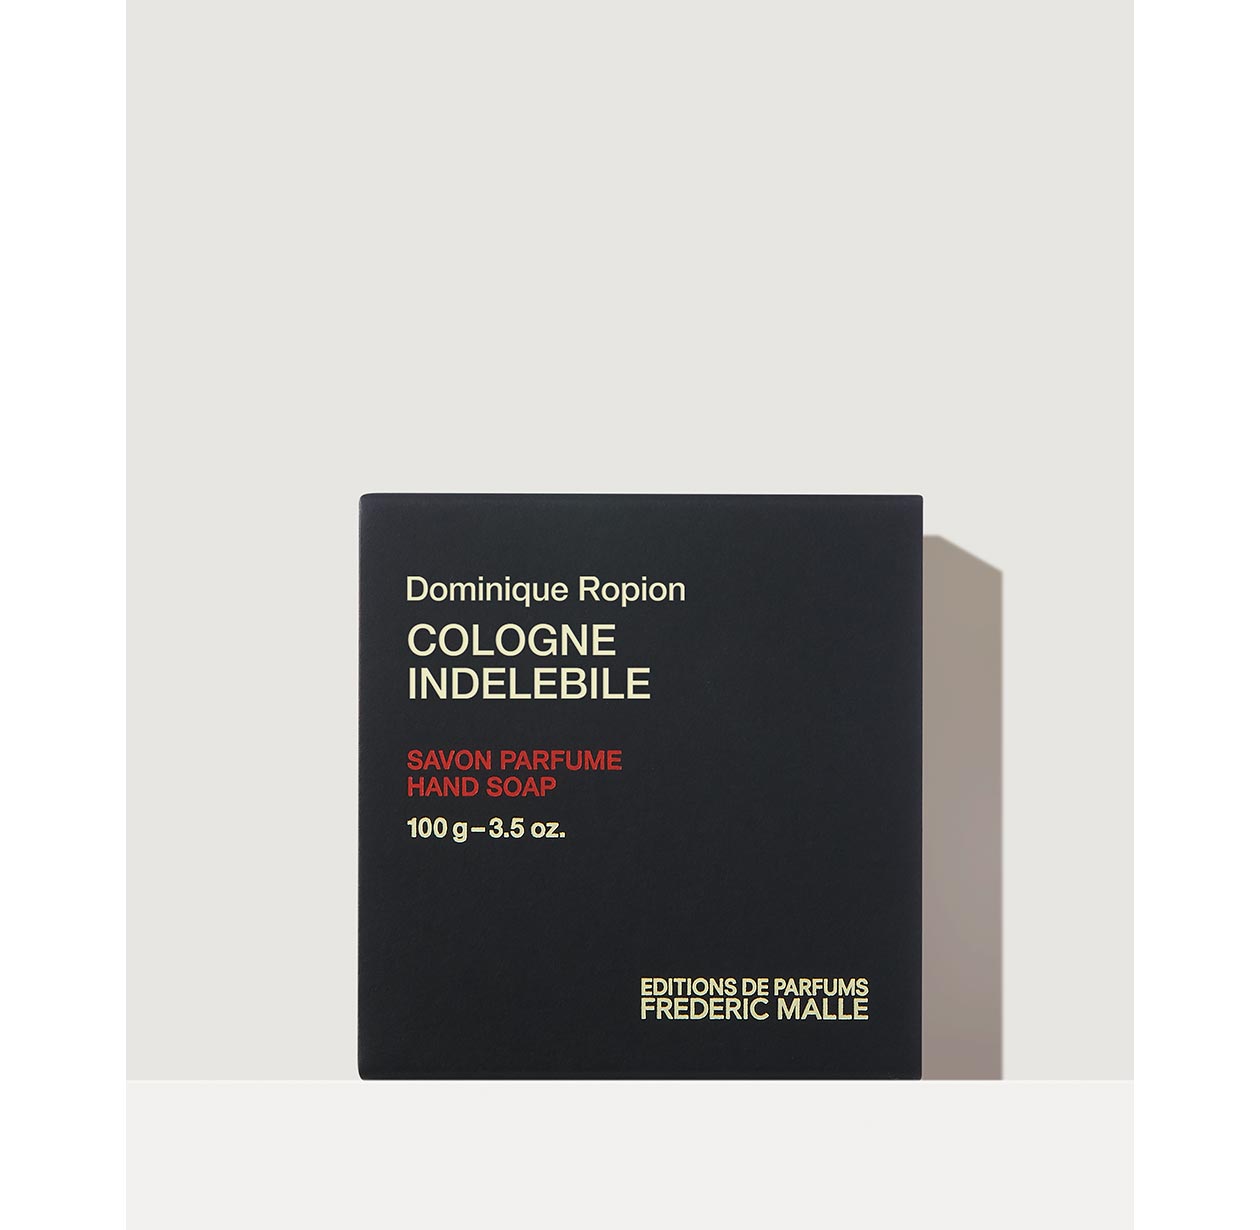 <p <span style="color:#000000;"><span style="font-size:12px;">FREDERIC MALLE </span></span></p>Hand Soap